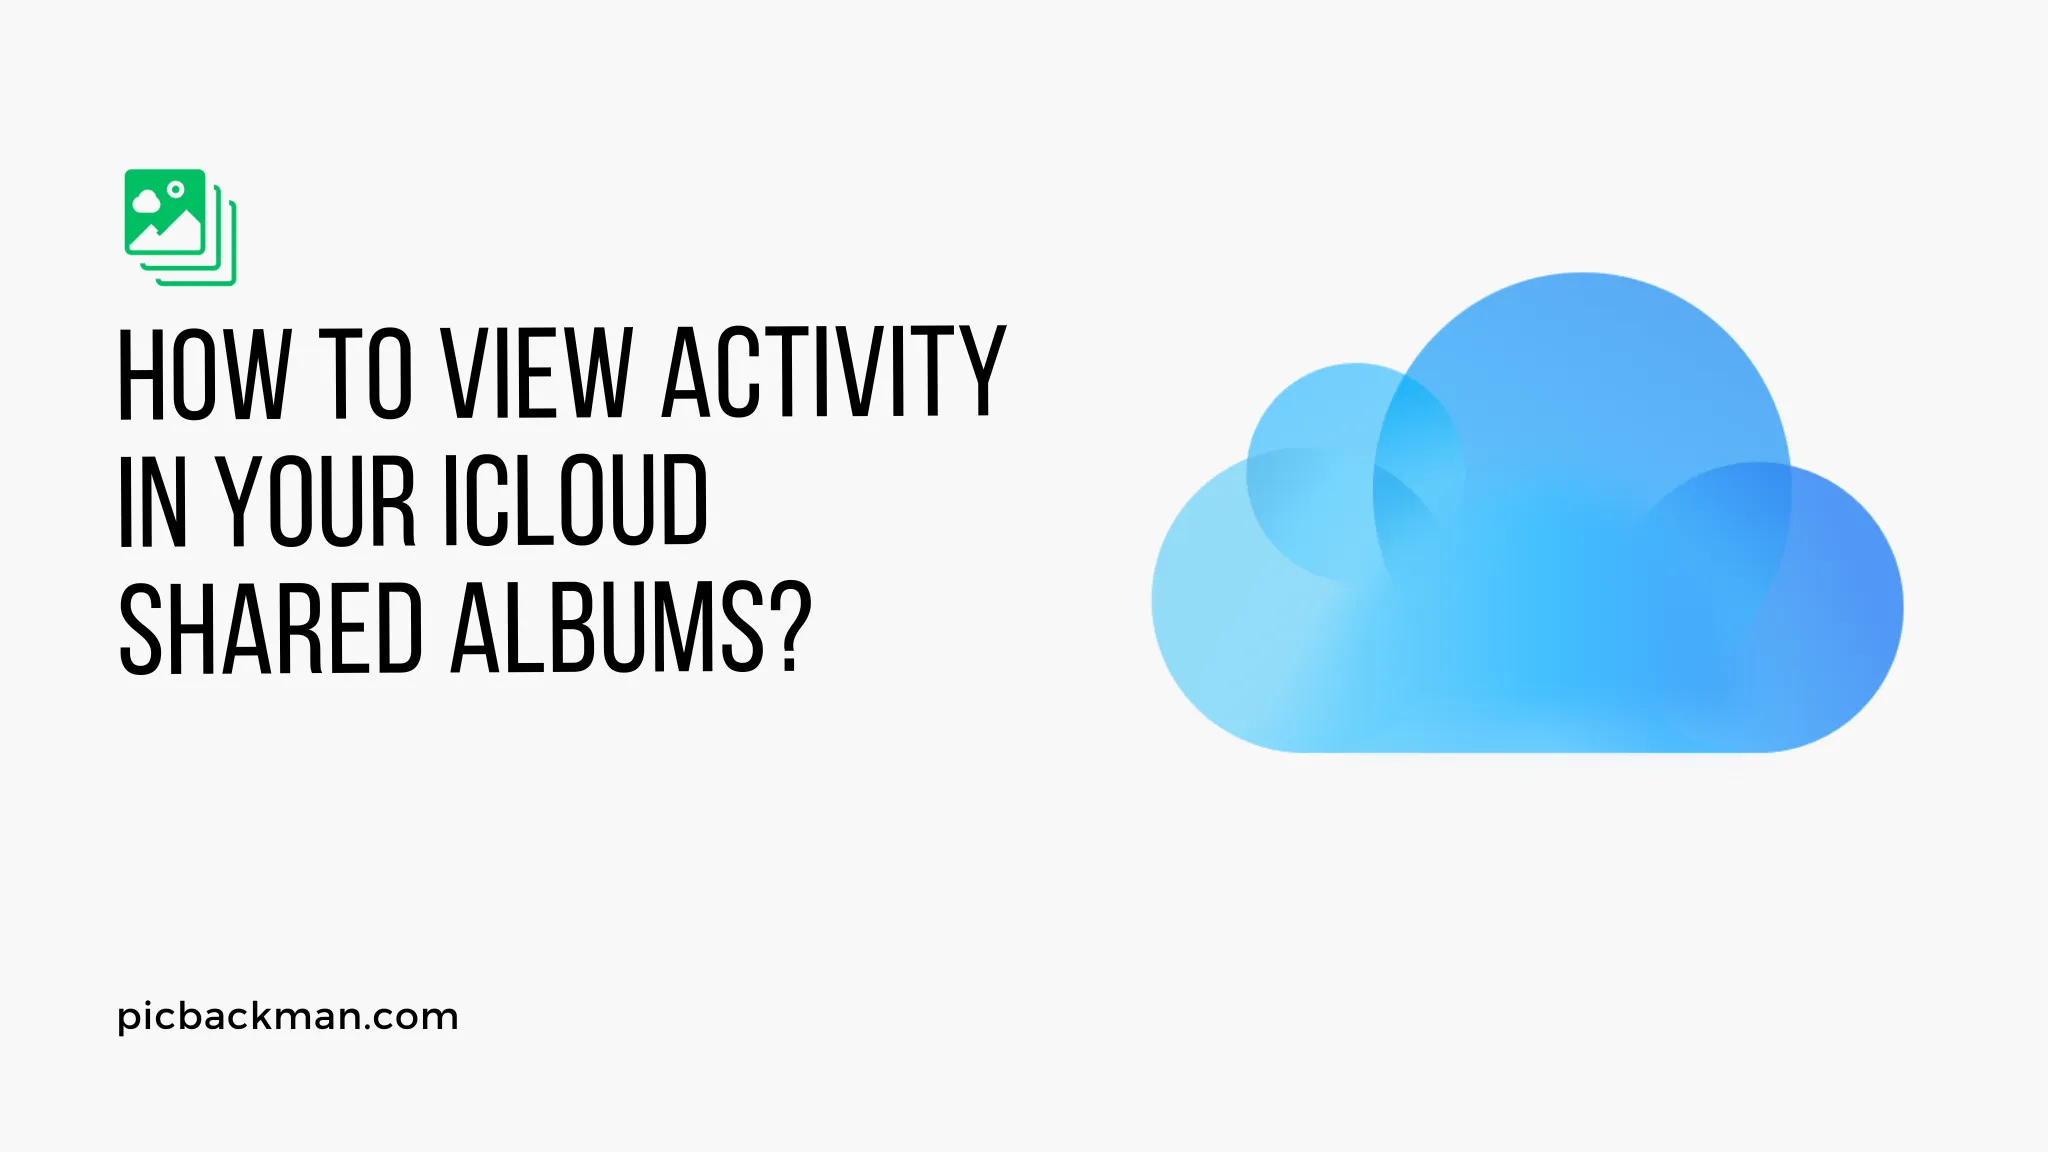 How to View Activity in your iCloud Shared Albums